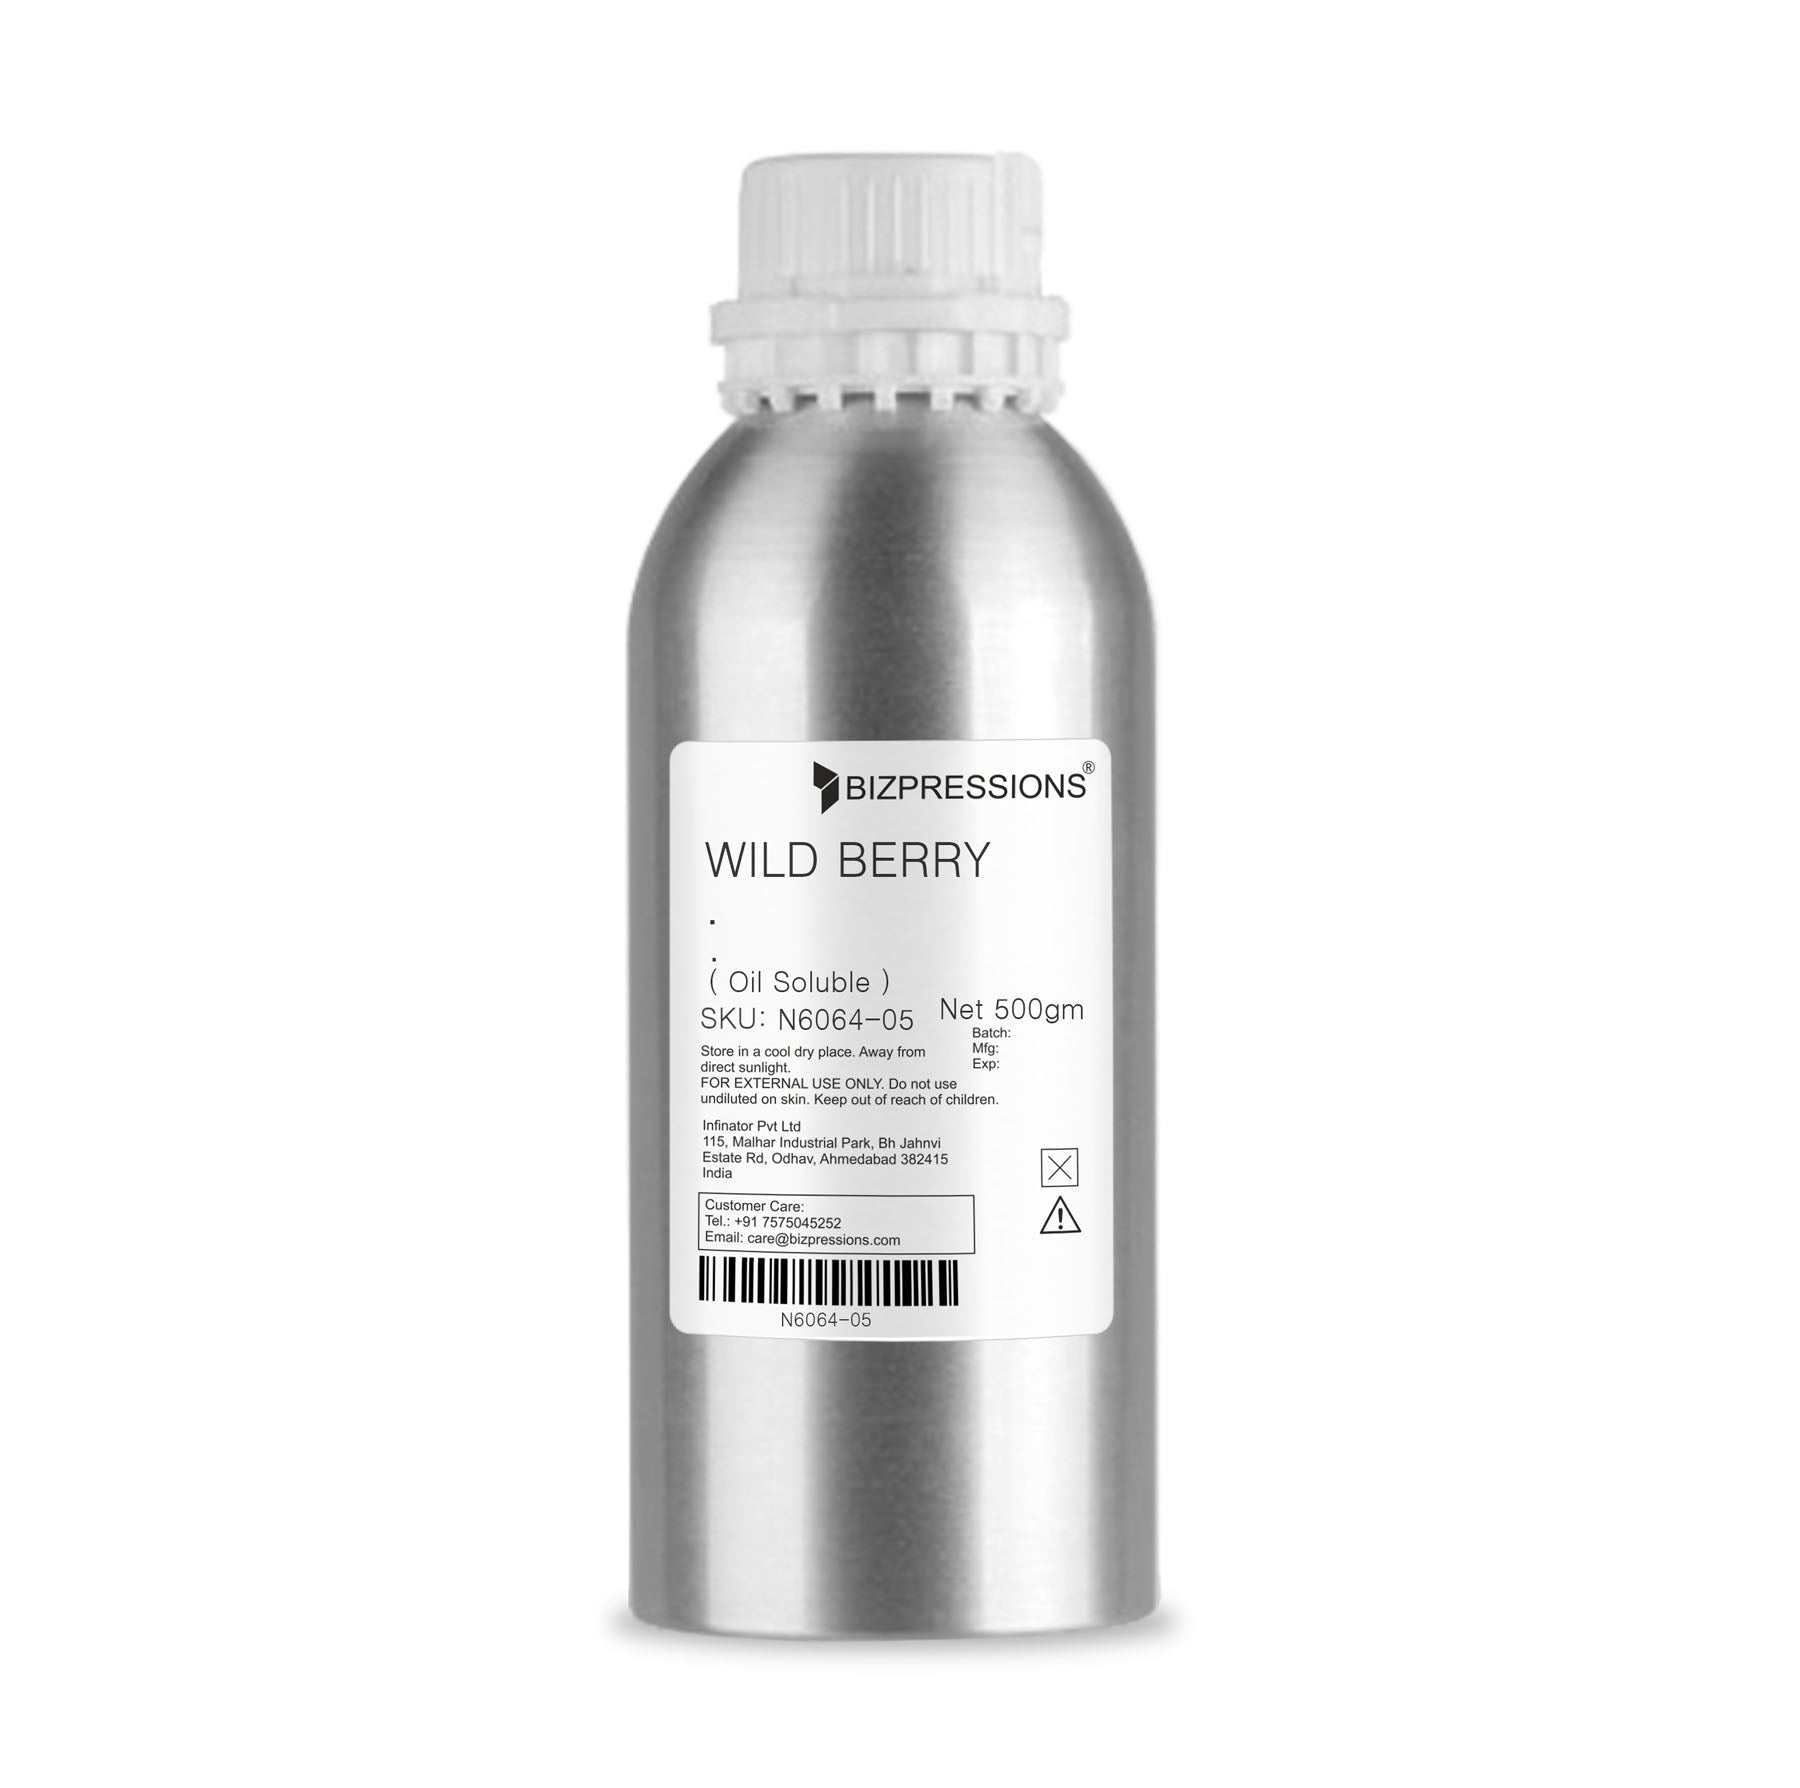 WILD BERRY - Fragrance ( Oil Soluble ) - 500 gm